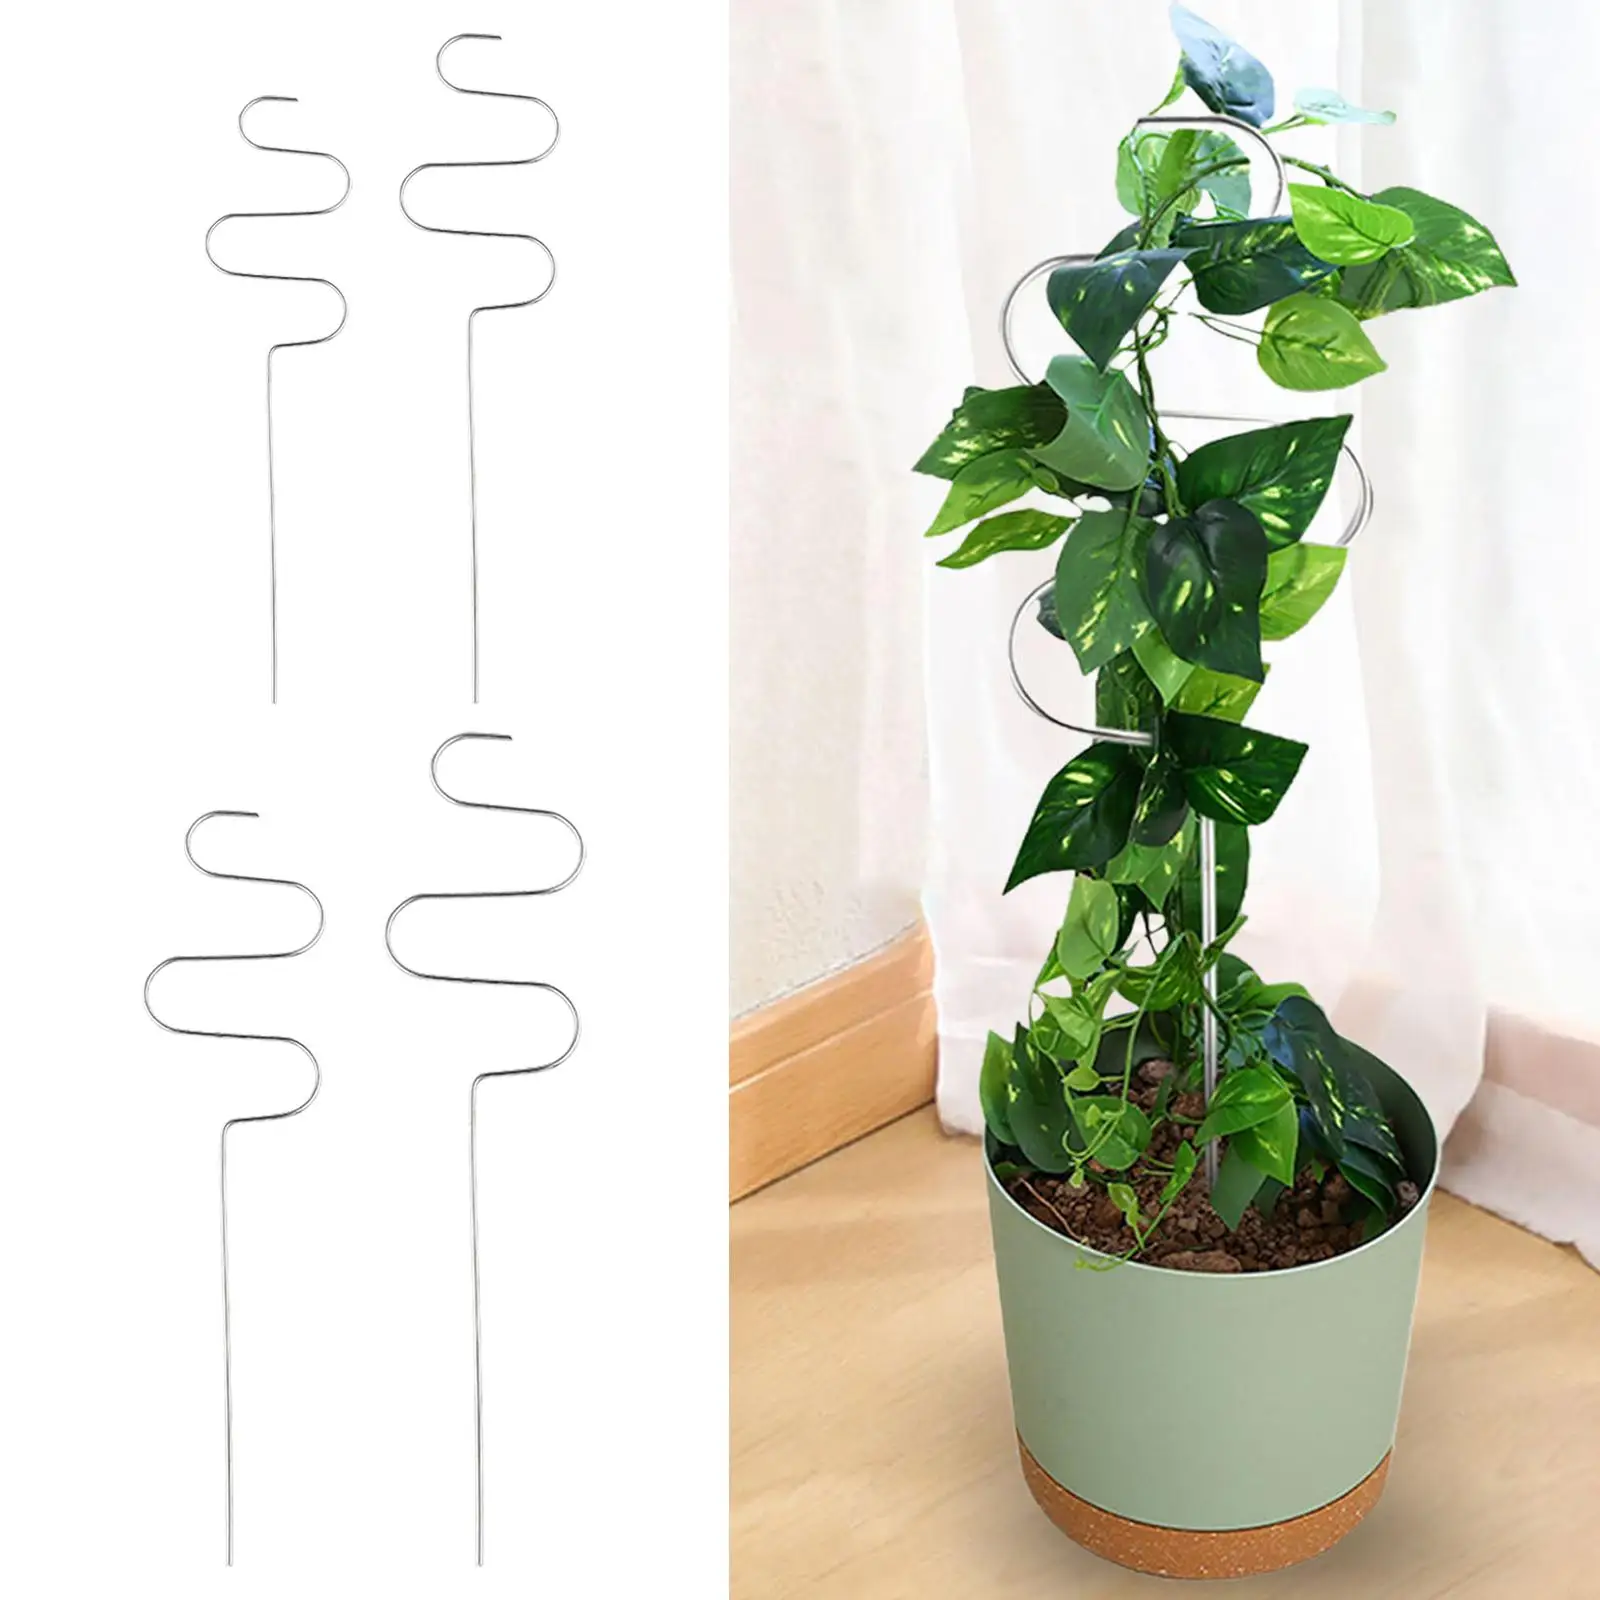 Set of 3 Decorative Plant Stake Flowerpot Decor Sturdy Long Lasting Metal Plant Trellis Plant Support Structures for Vegetable